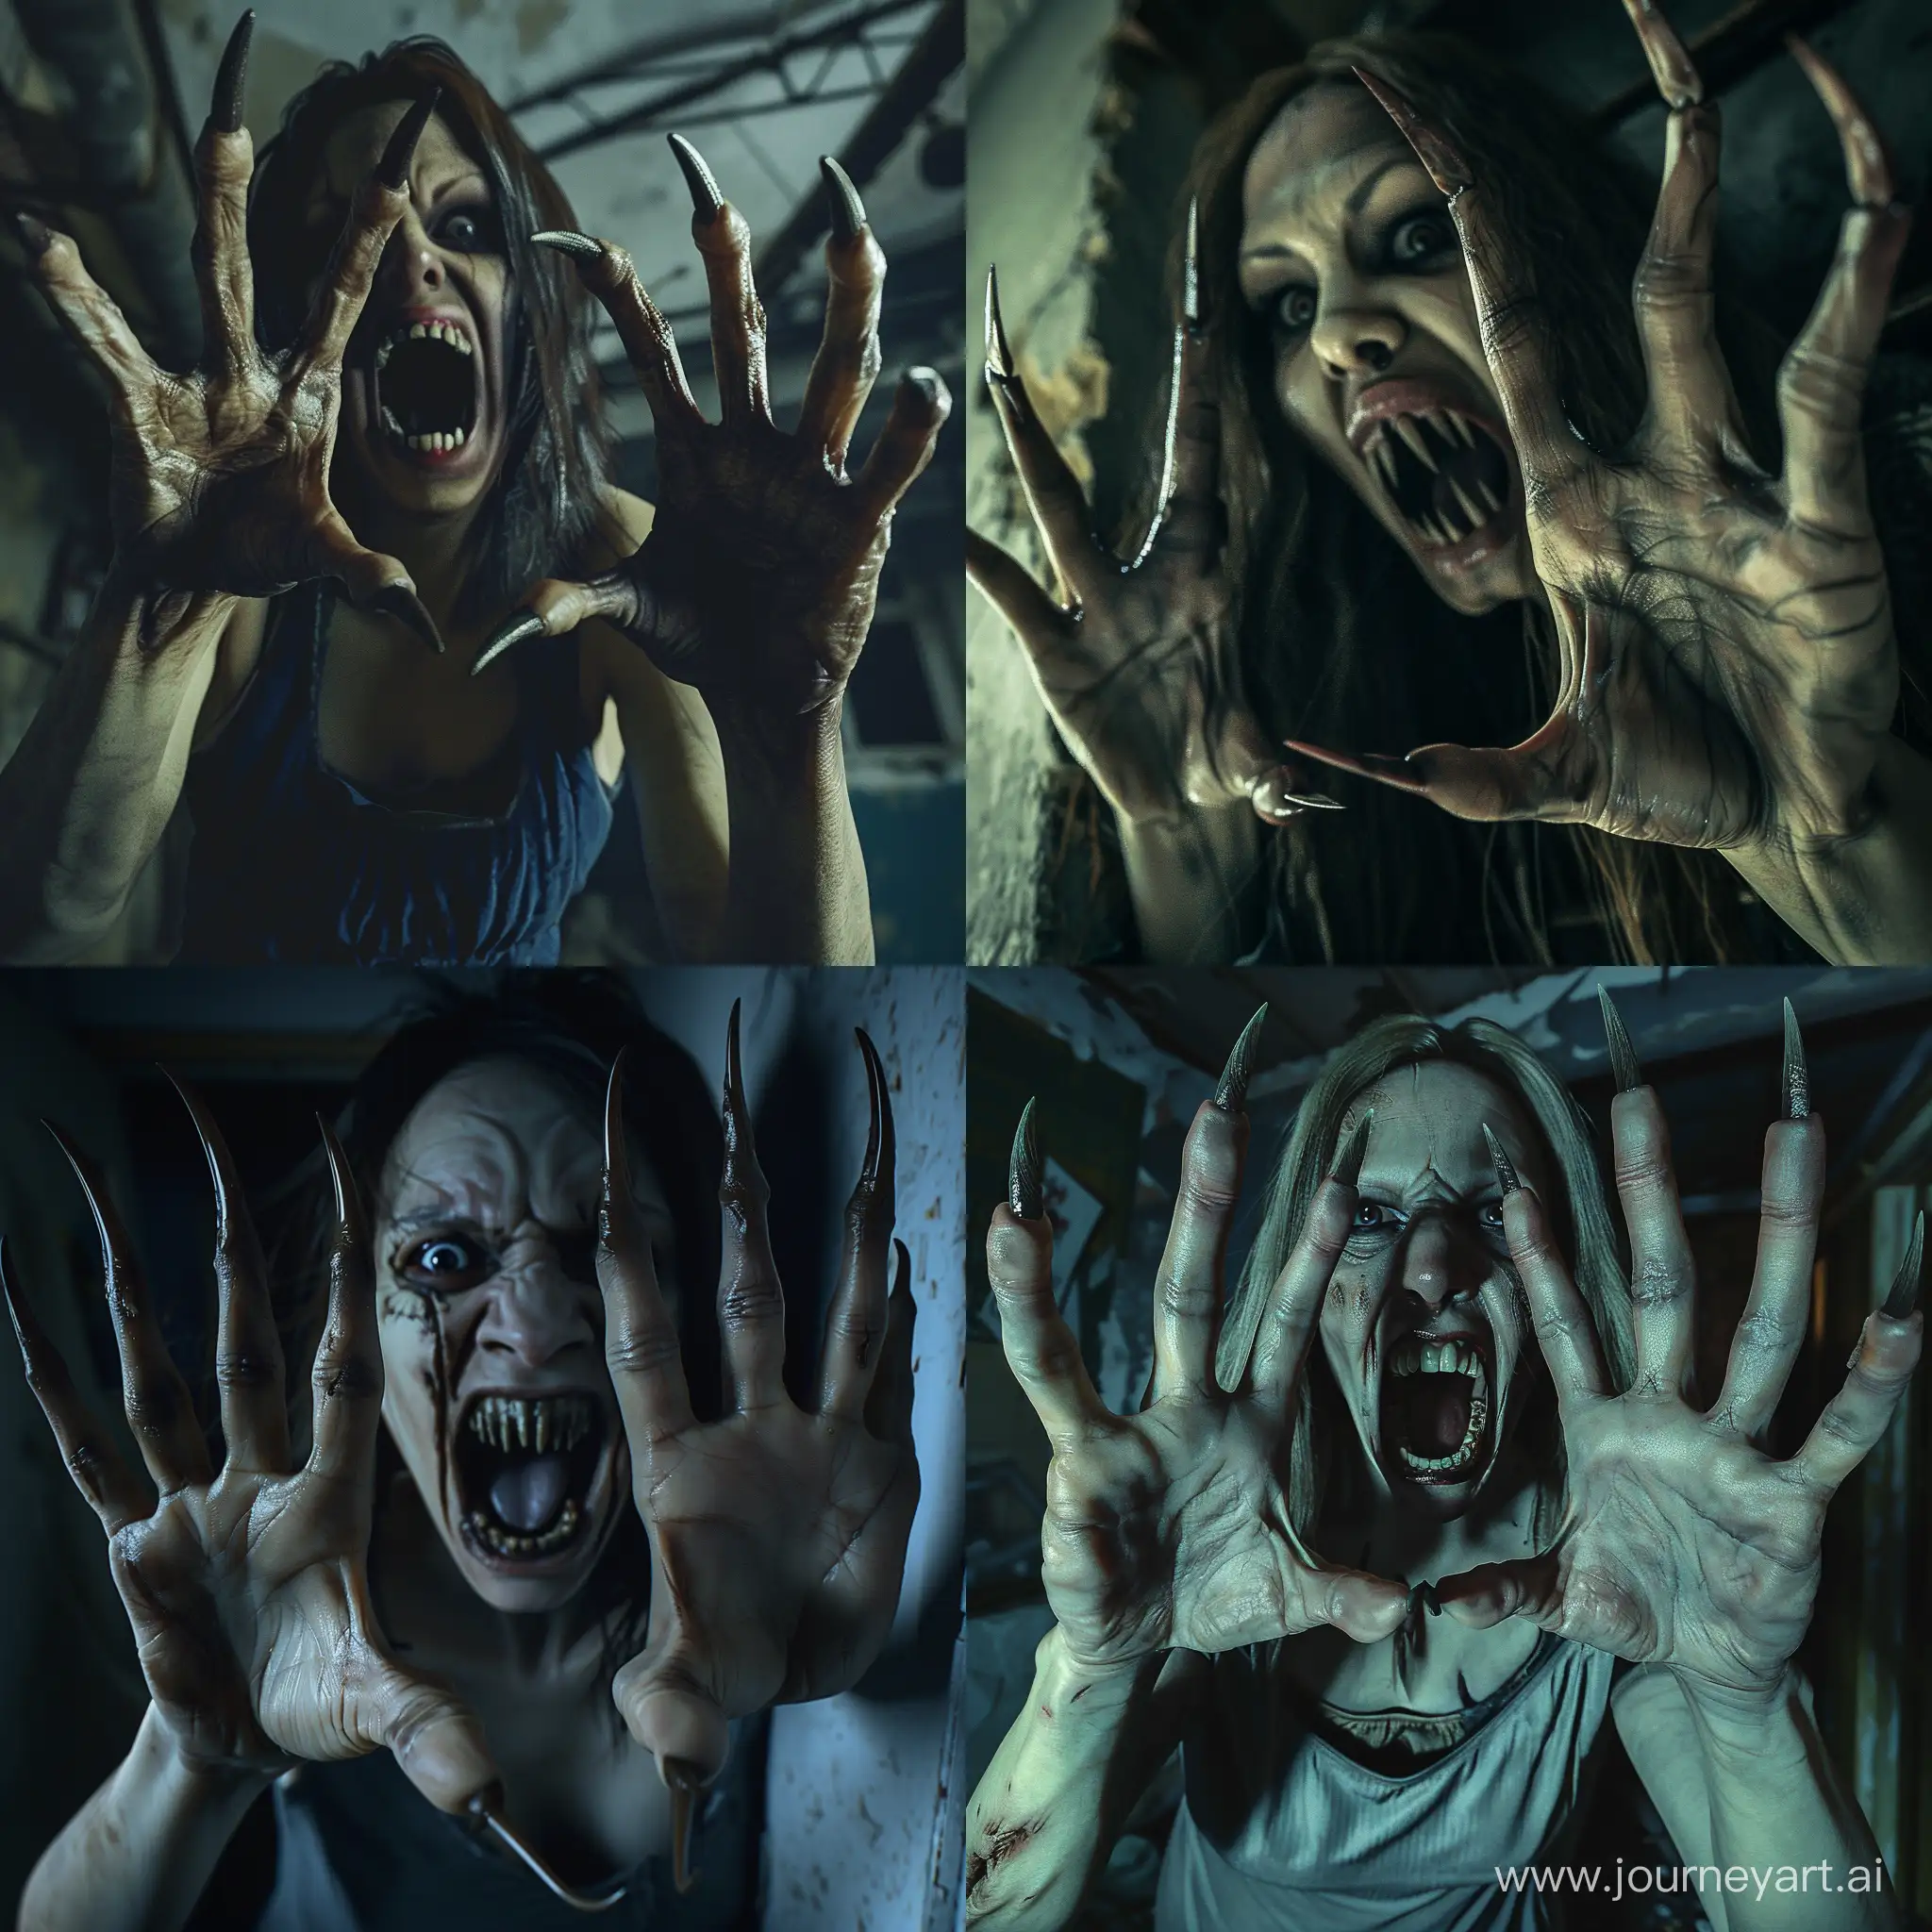 A Terrible Zombie woman with long curved pointed nails protruding from her  five fingers like menacing claws, she looks like a who has climbed out of the grave, her mouth is threateningly open exposing pointed teeth resembling fangs, The scene takes place at night, in an abandoned building, hyper-realism, photorealistic, cinematic, high detailed, nails detailed, detailed photo.